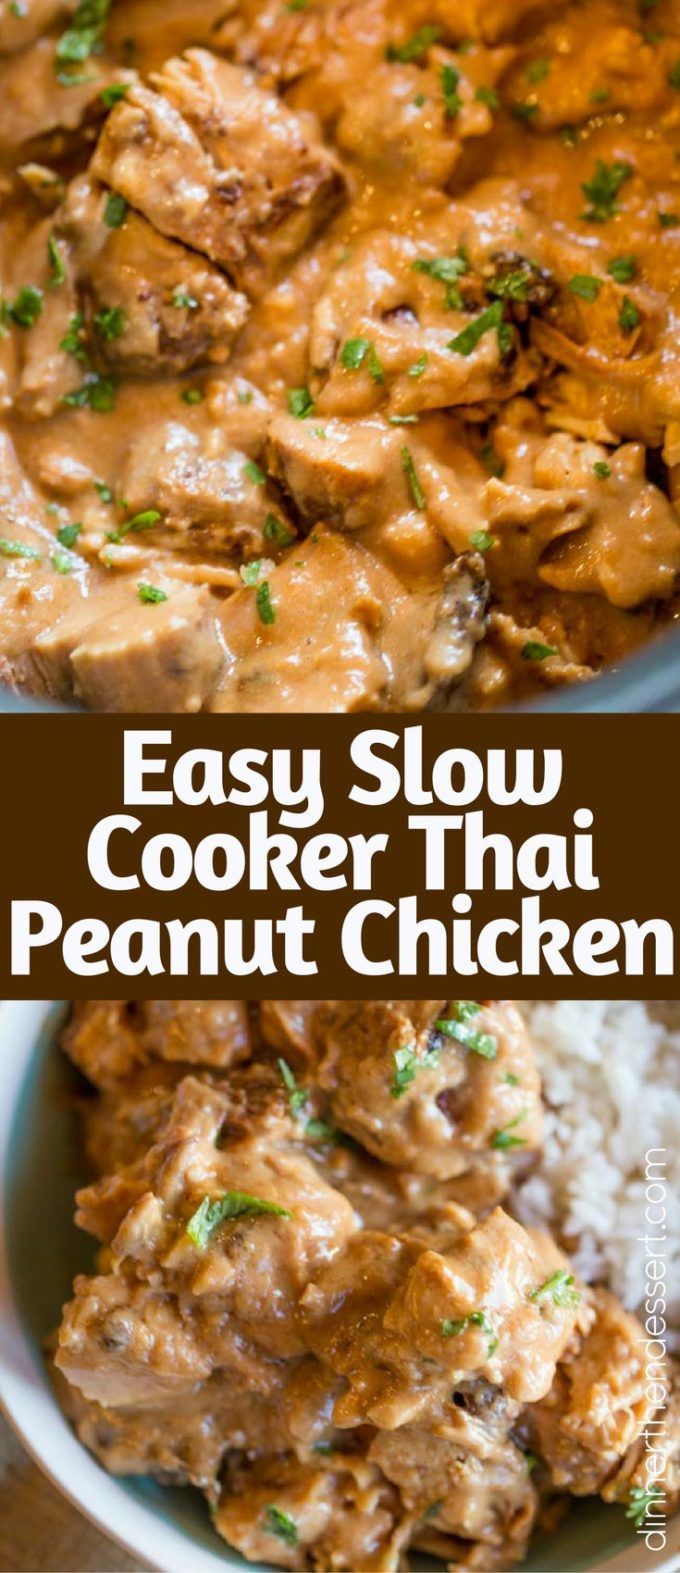 Slow Cooker Thai Peanut Chicken is an easy weeknight meal made with coconut milk, lime juice, peanut butter, ginger and garlic.